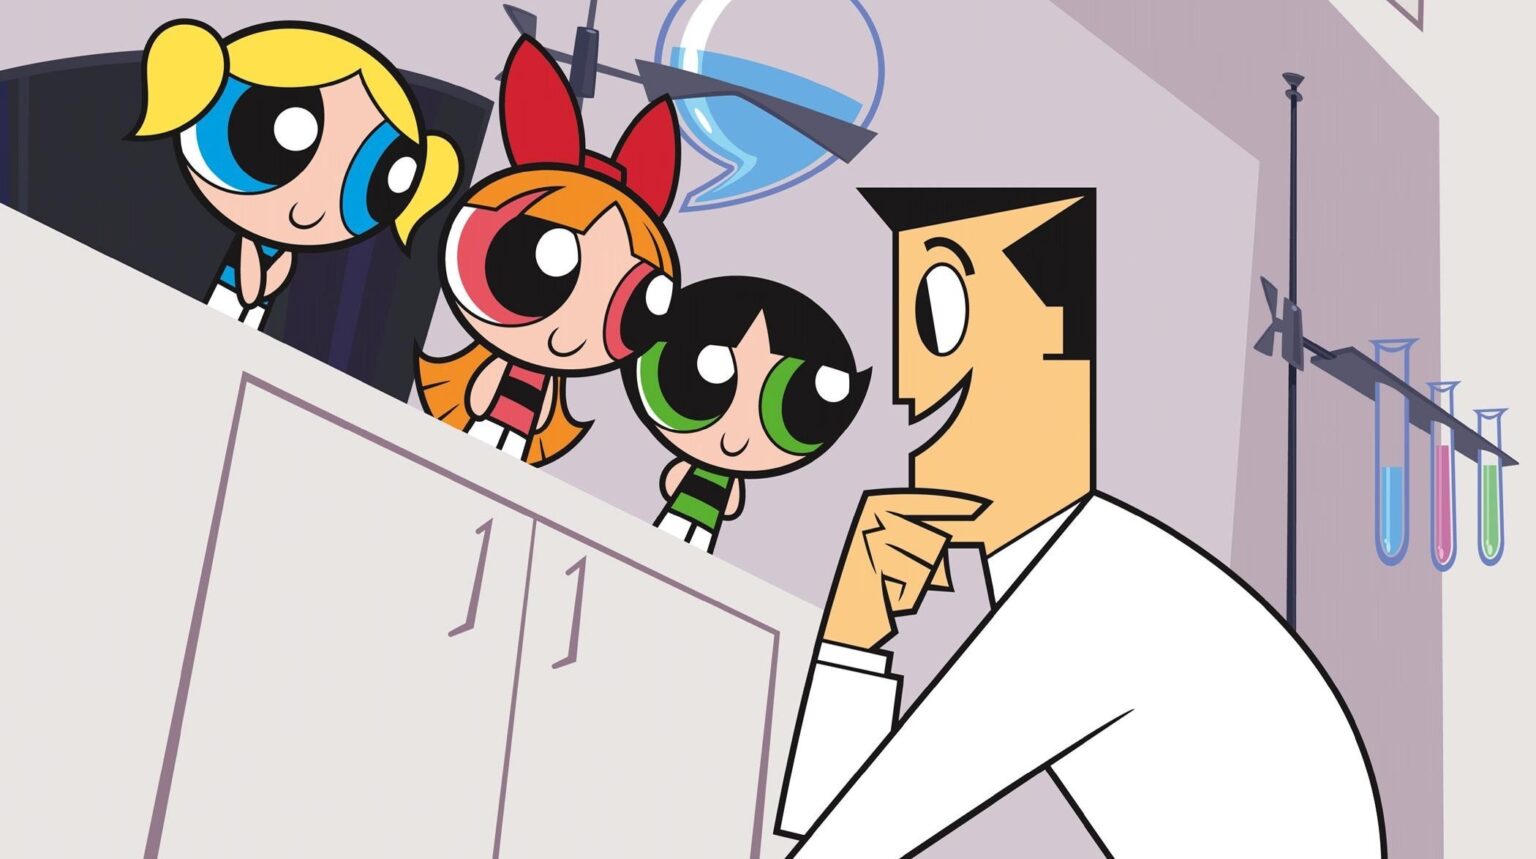 Everyone's favorite girl power cartoon 'The Powerpuff Girls' is headed for live-action. Who's taking on the role of their loving creator Professor Utonium?